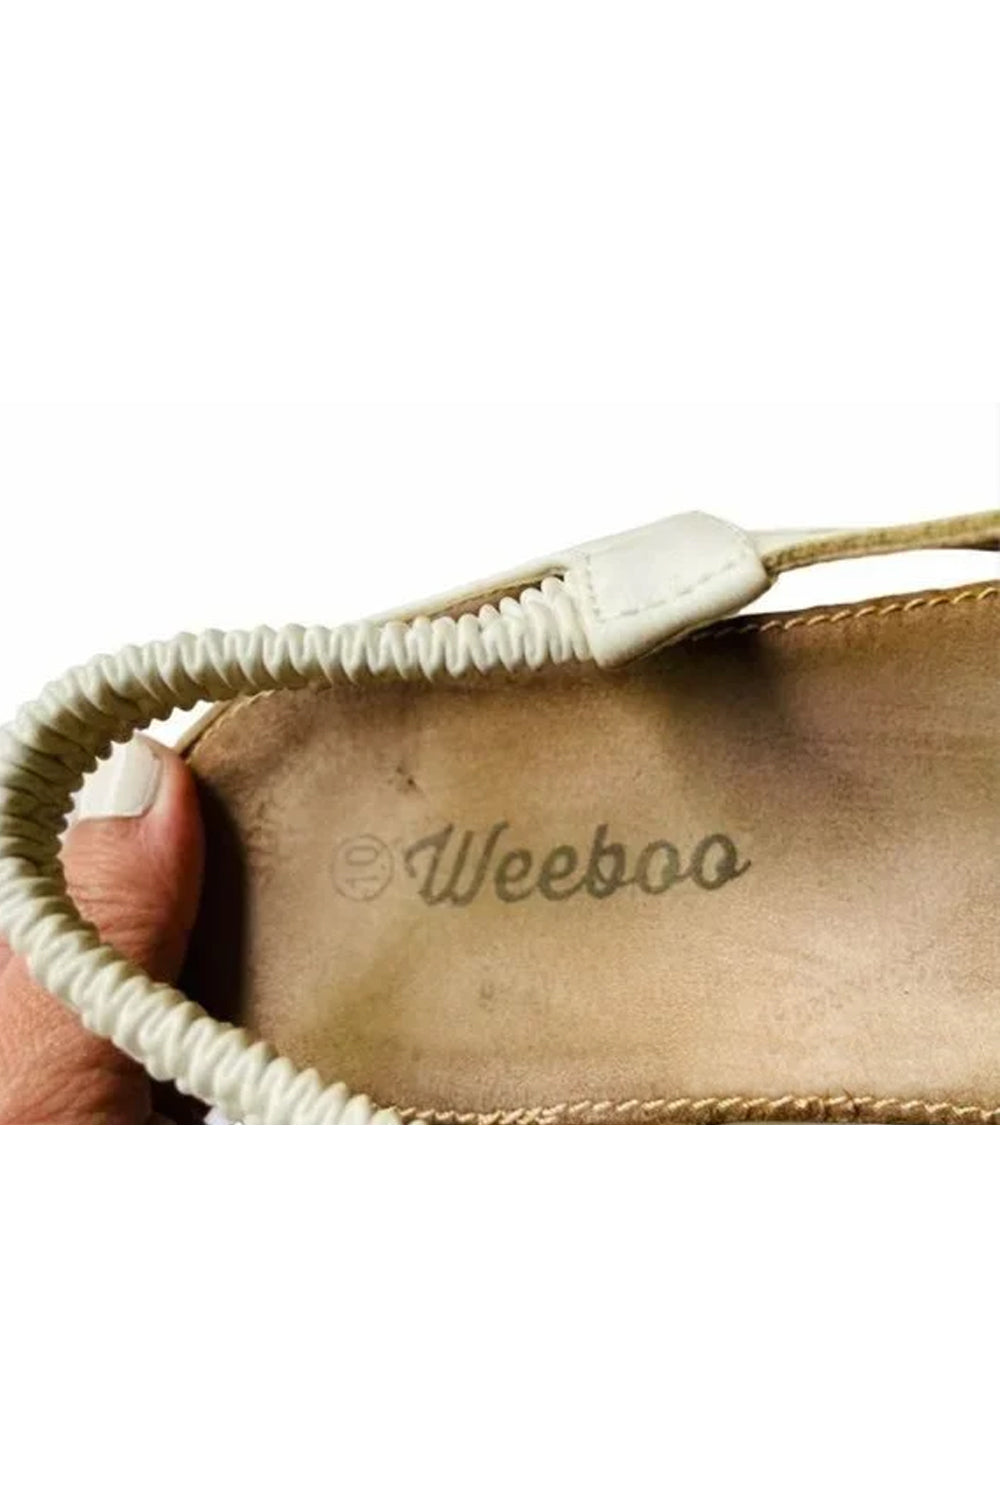 Weeboo Women’s Back Leather Sandals